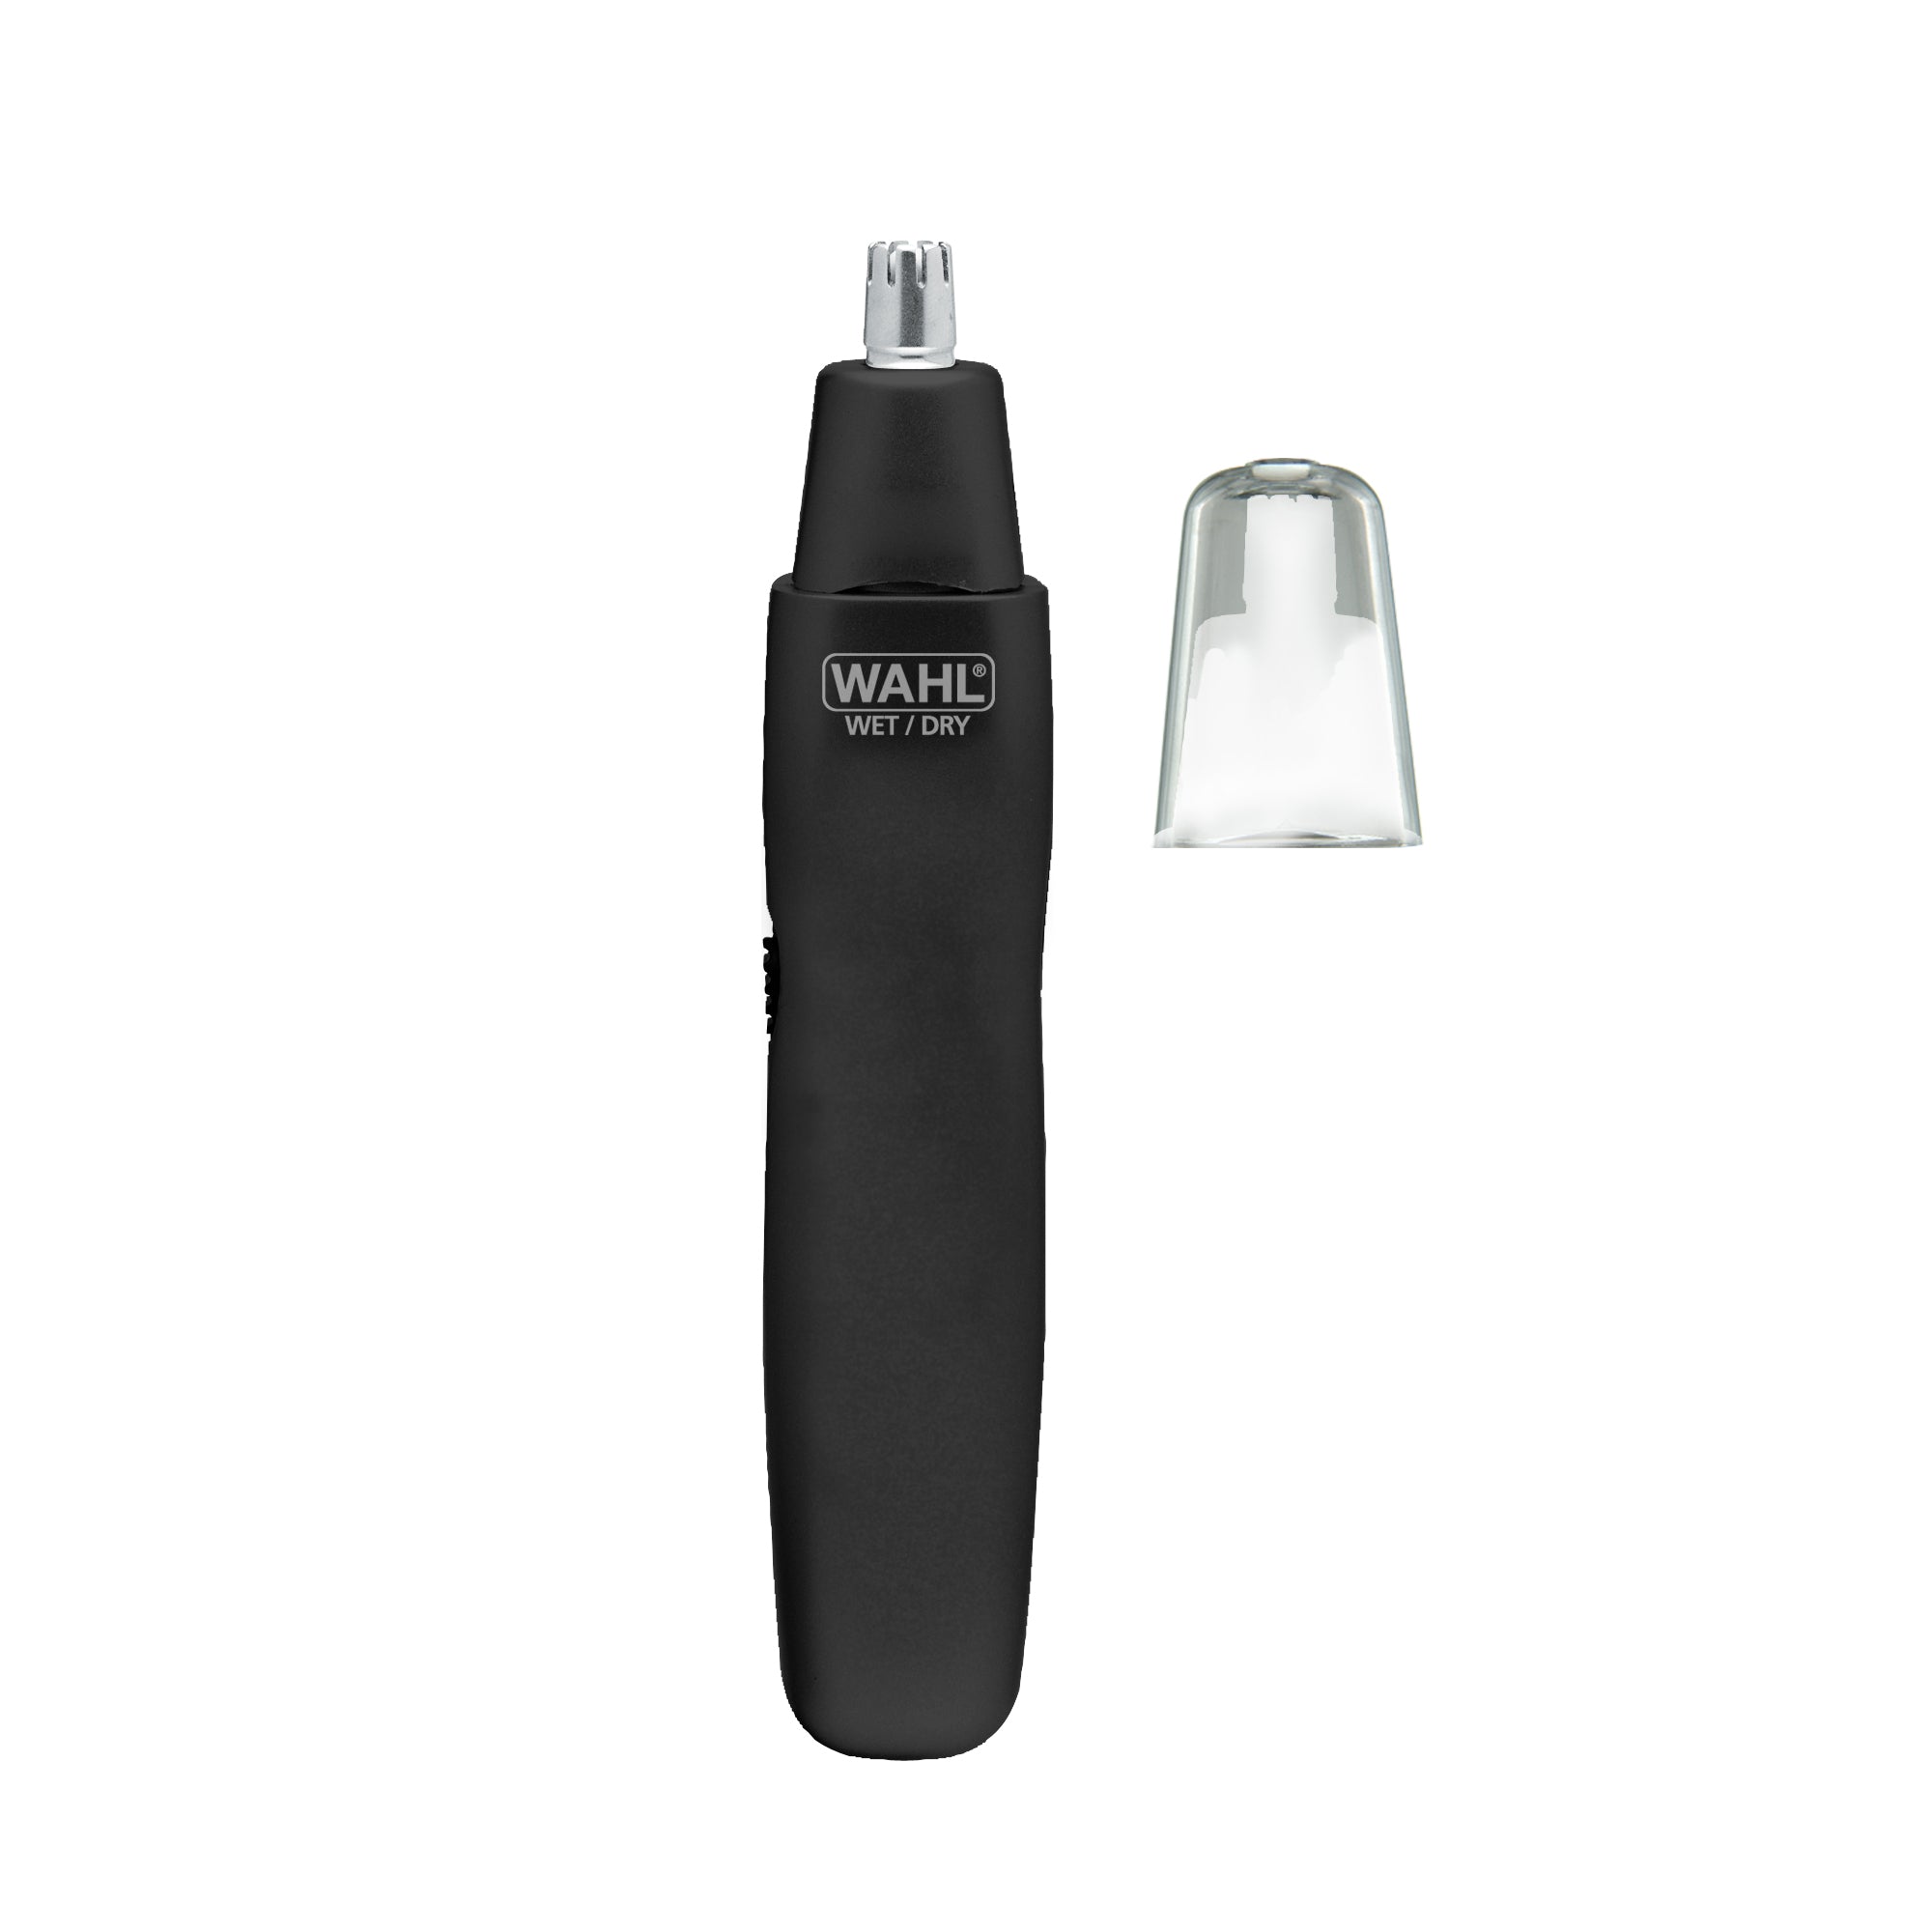 EAR, NOSE, BROW WET/DRY TRIMMER